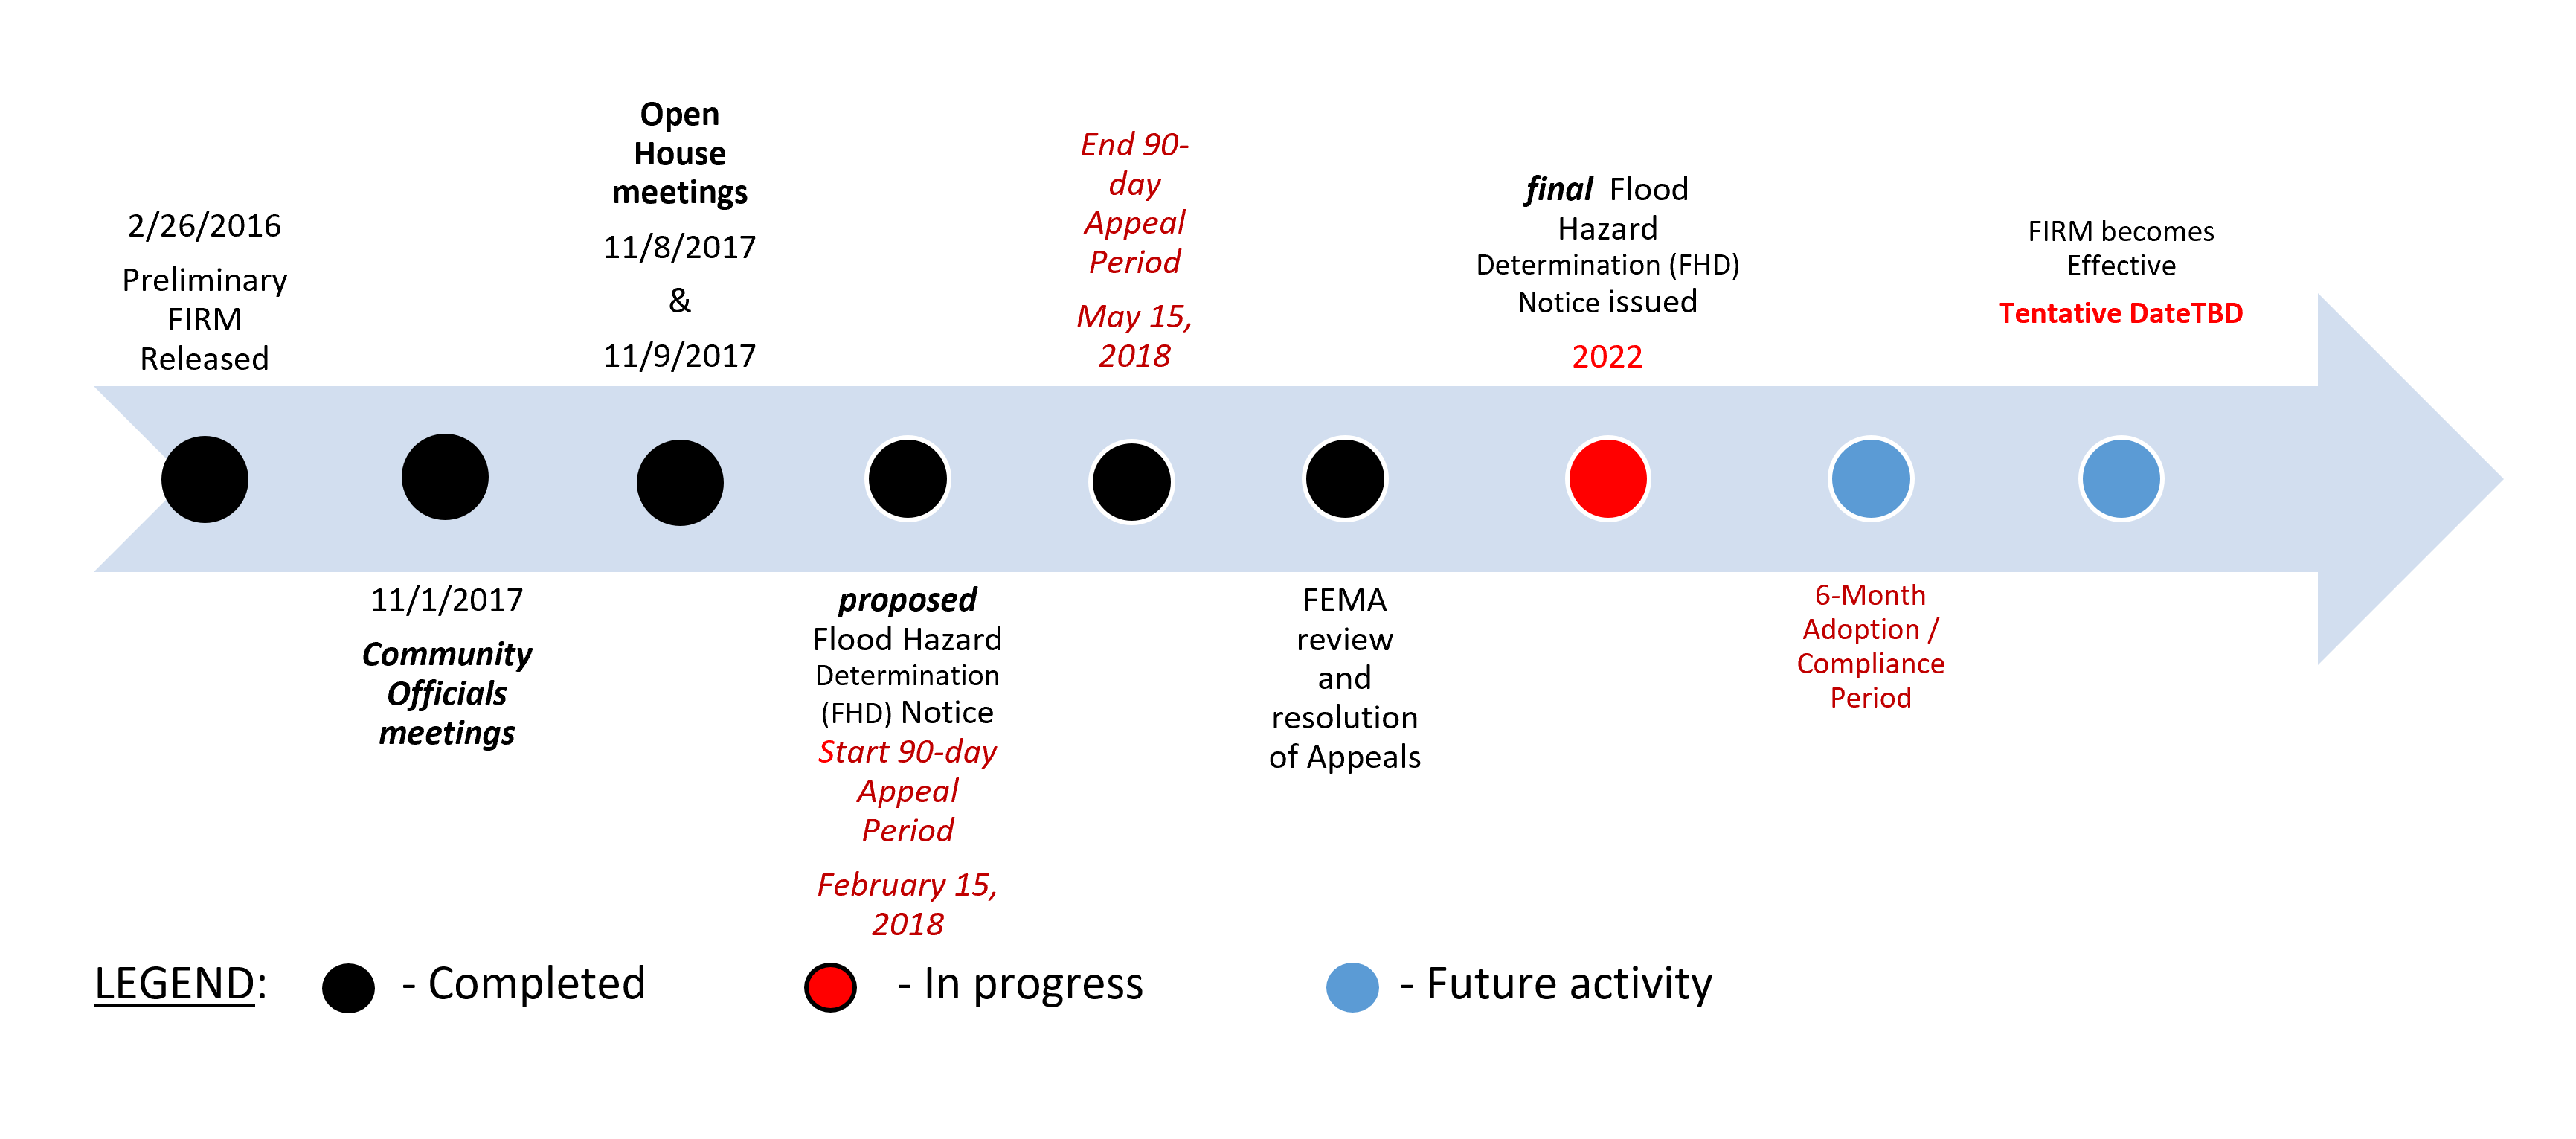 Updates map adoption process timeline. The final Flood Hazard Determination notice will be issued in 2022, followed by a 6 month adoption/compliance period.